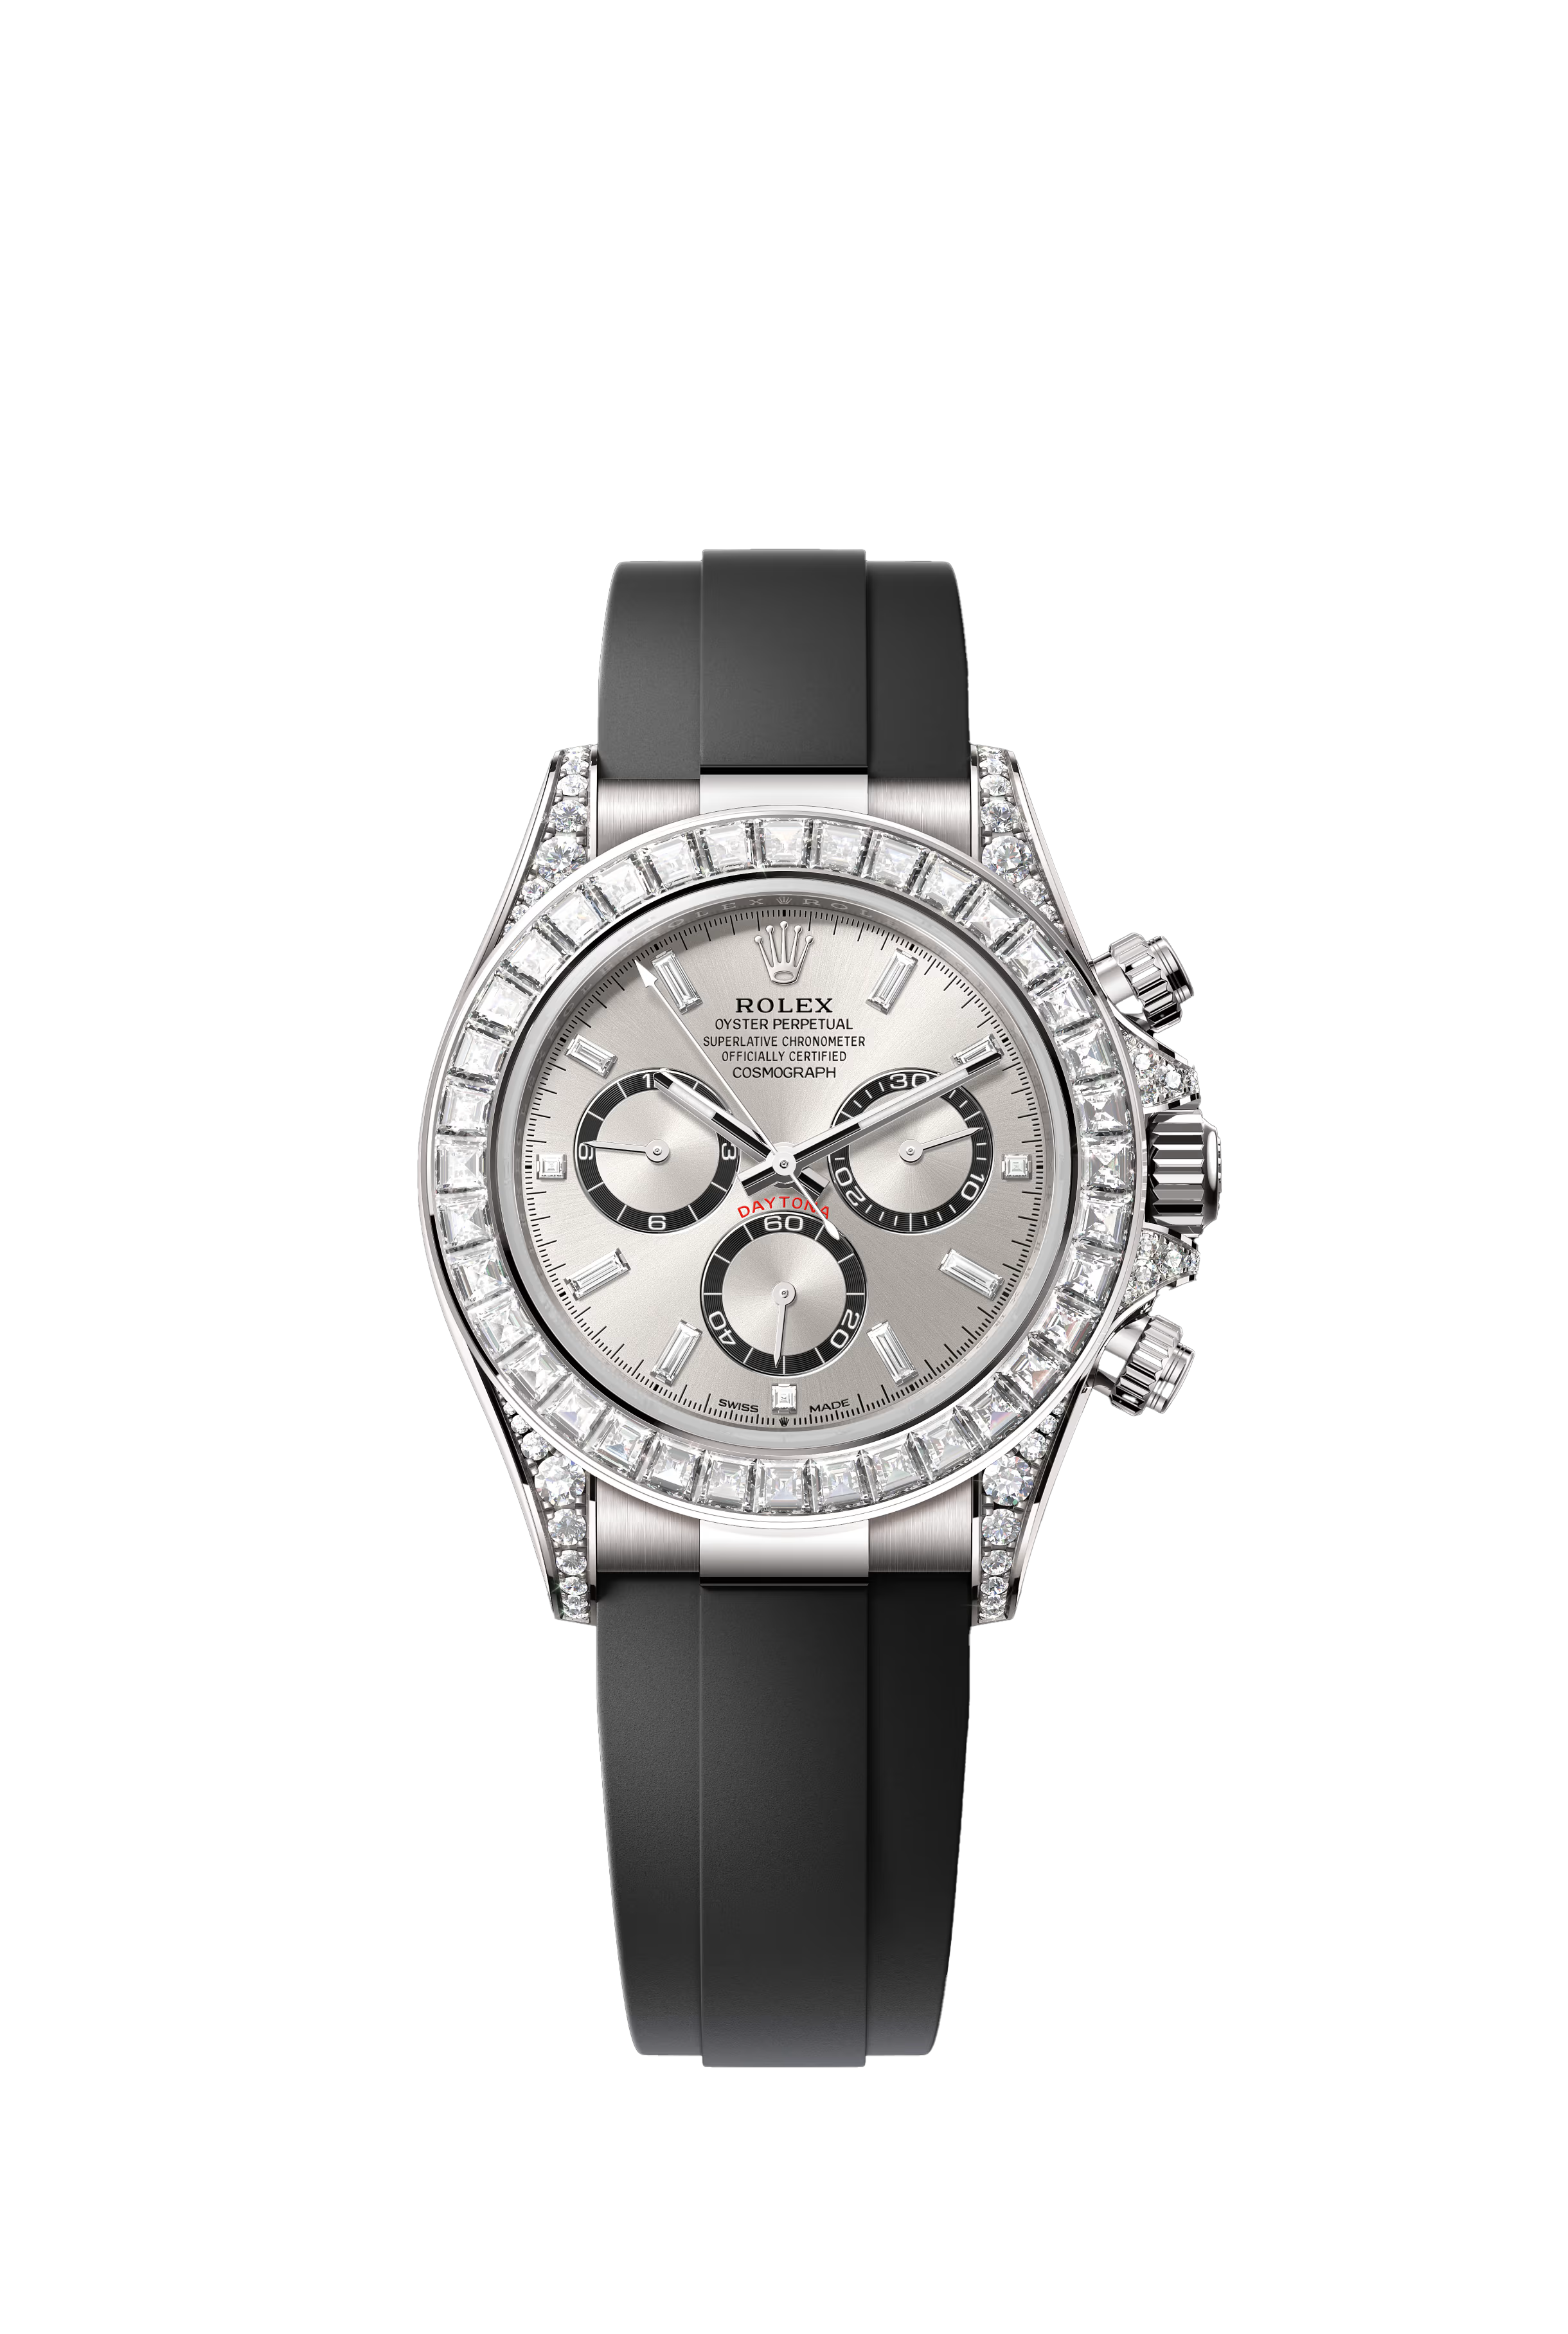 Rolex Cosmograph Daytona Oyster, 40 mm, white gold and diamonds Reference 126539TBR